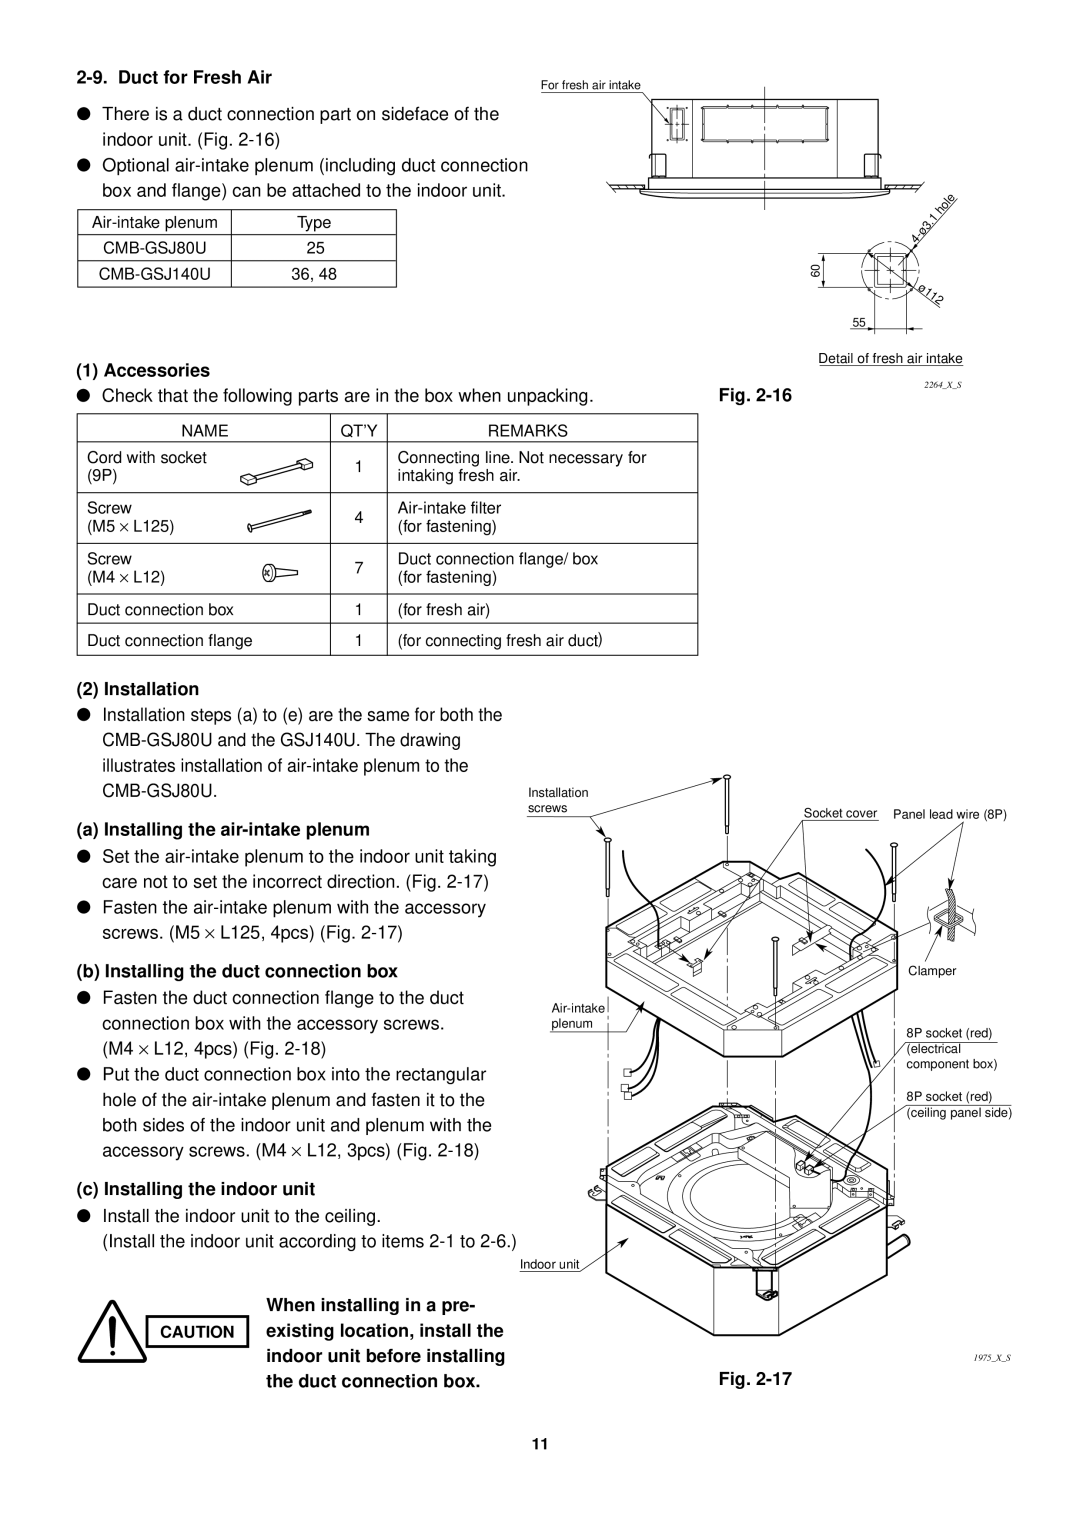 Sanyo SPW-XR254EH56 operation manual Duct for Fresh Air 